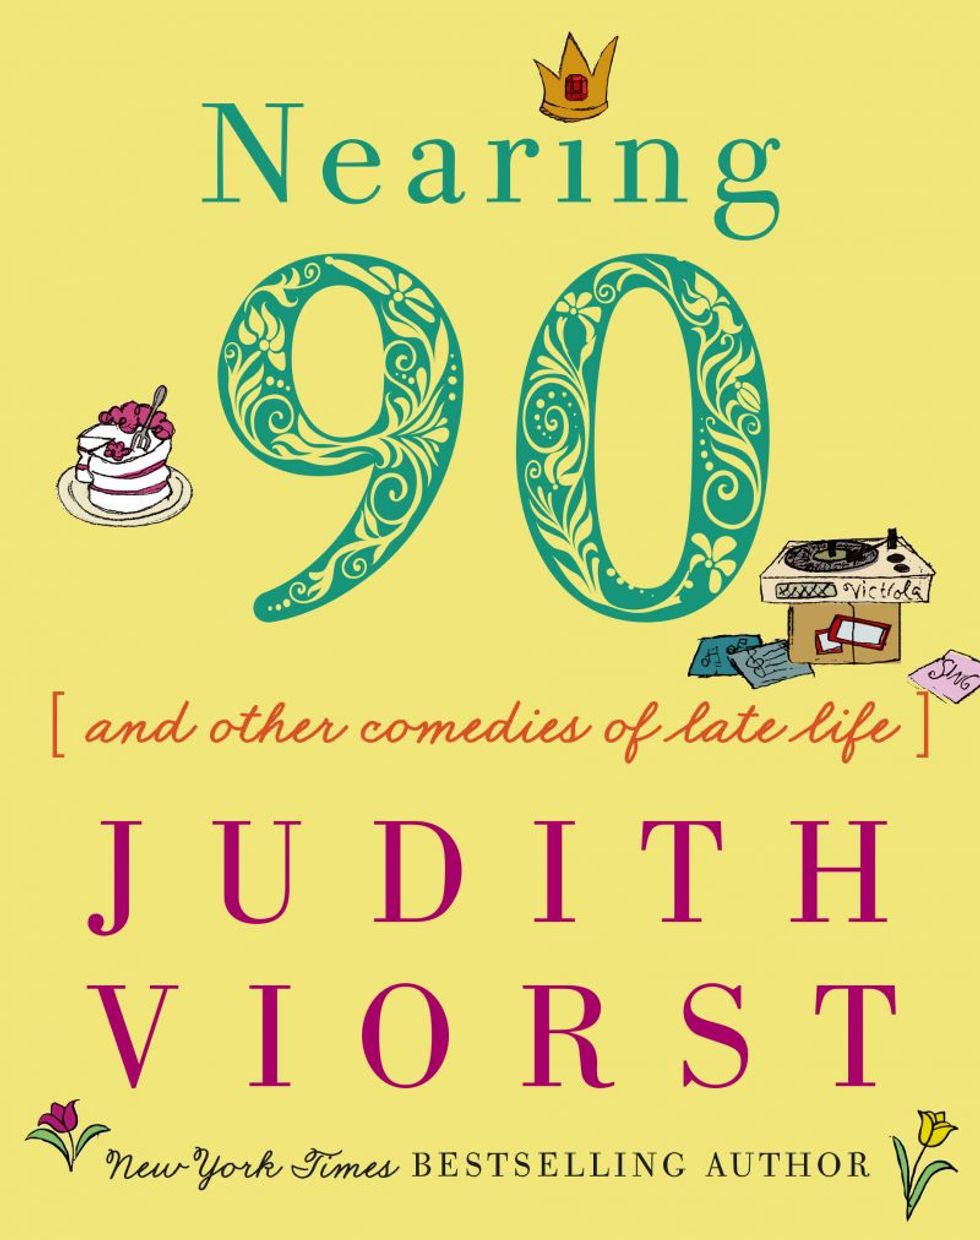 Judith Viorst's latest book features poems about late-life aging.